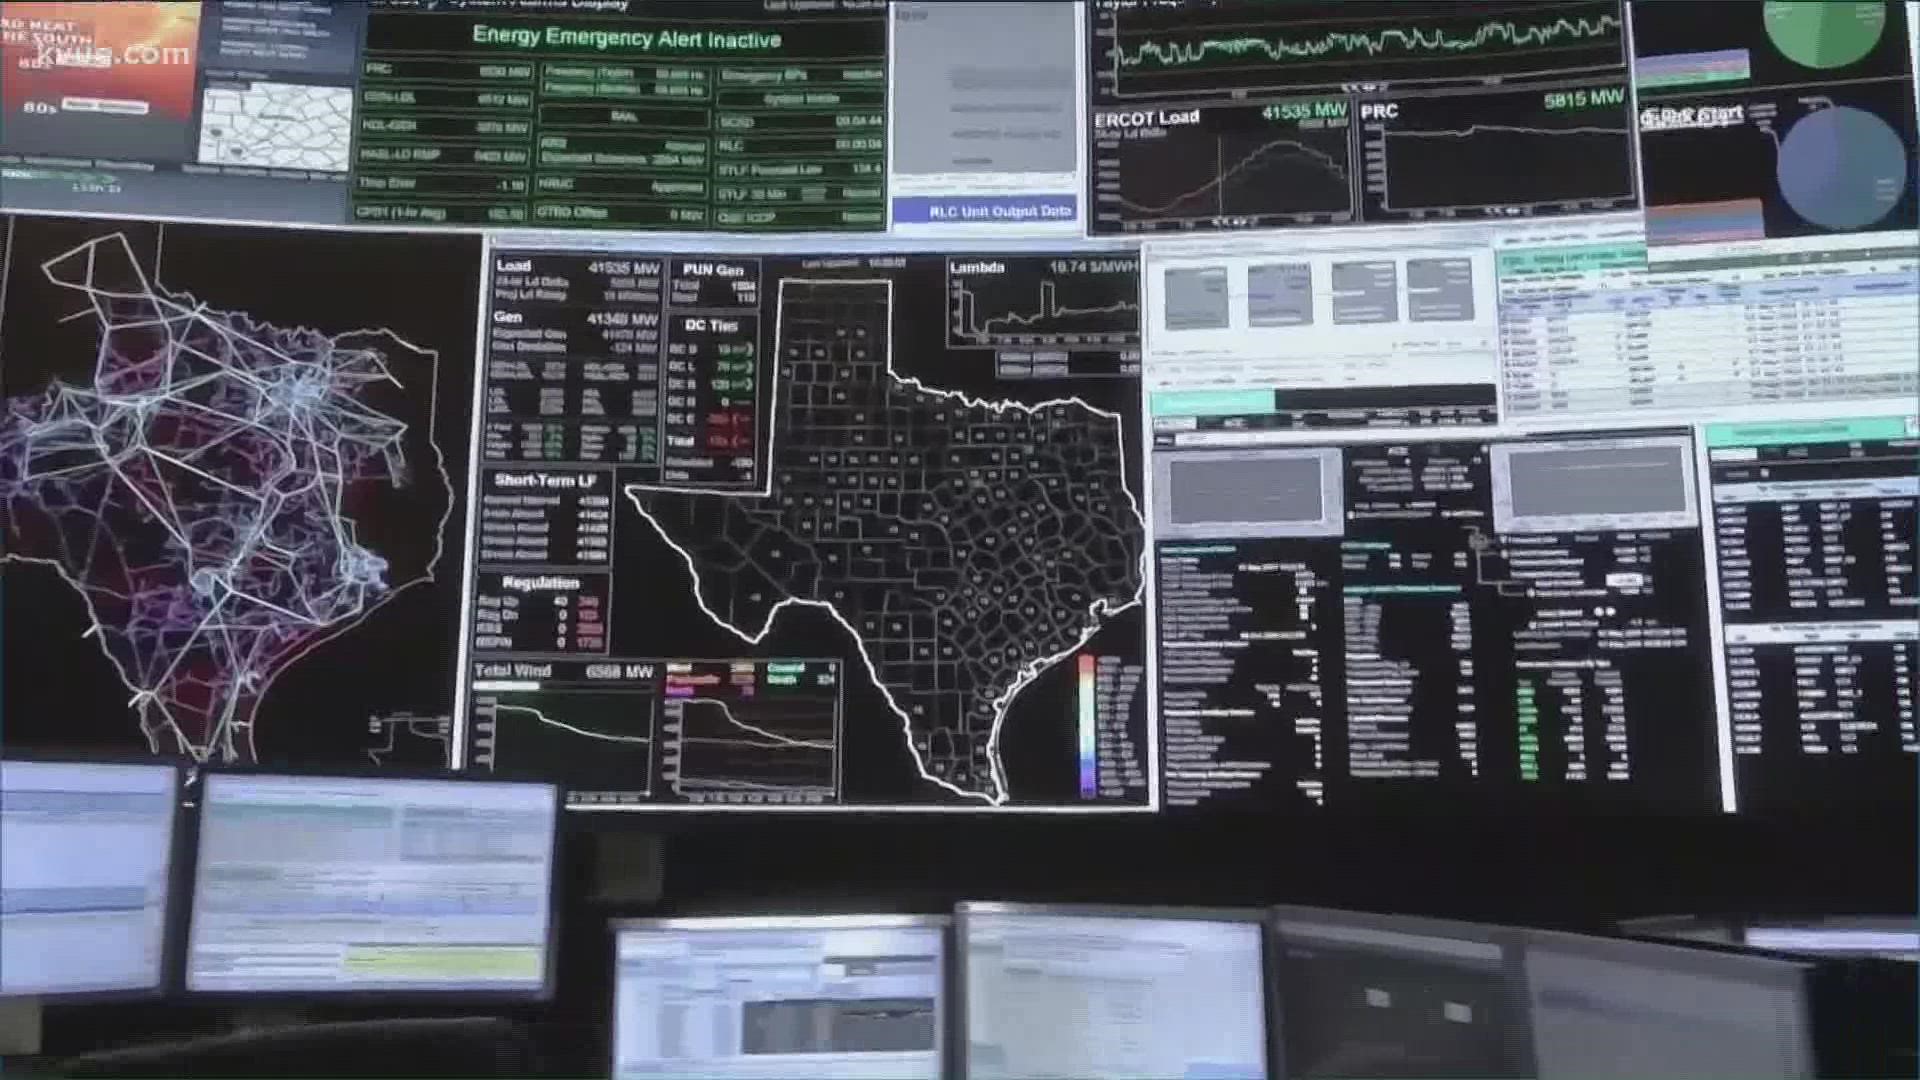 The state's power grid operator expects to see record demand this summer. But leaders say the grid will be able to handle the Texas heat.